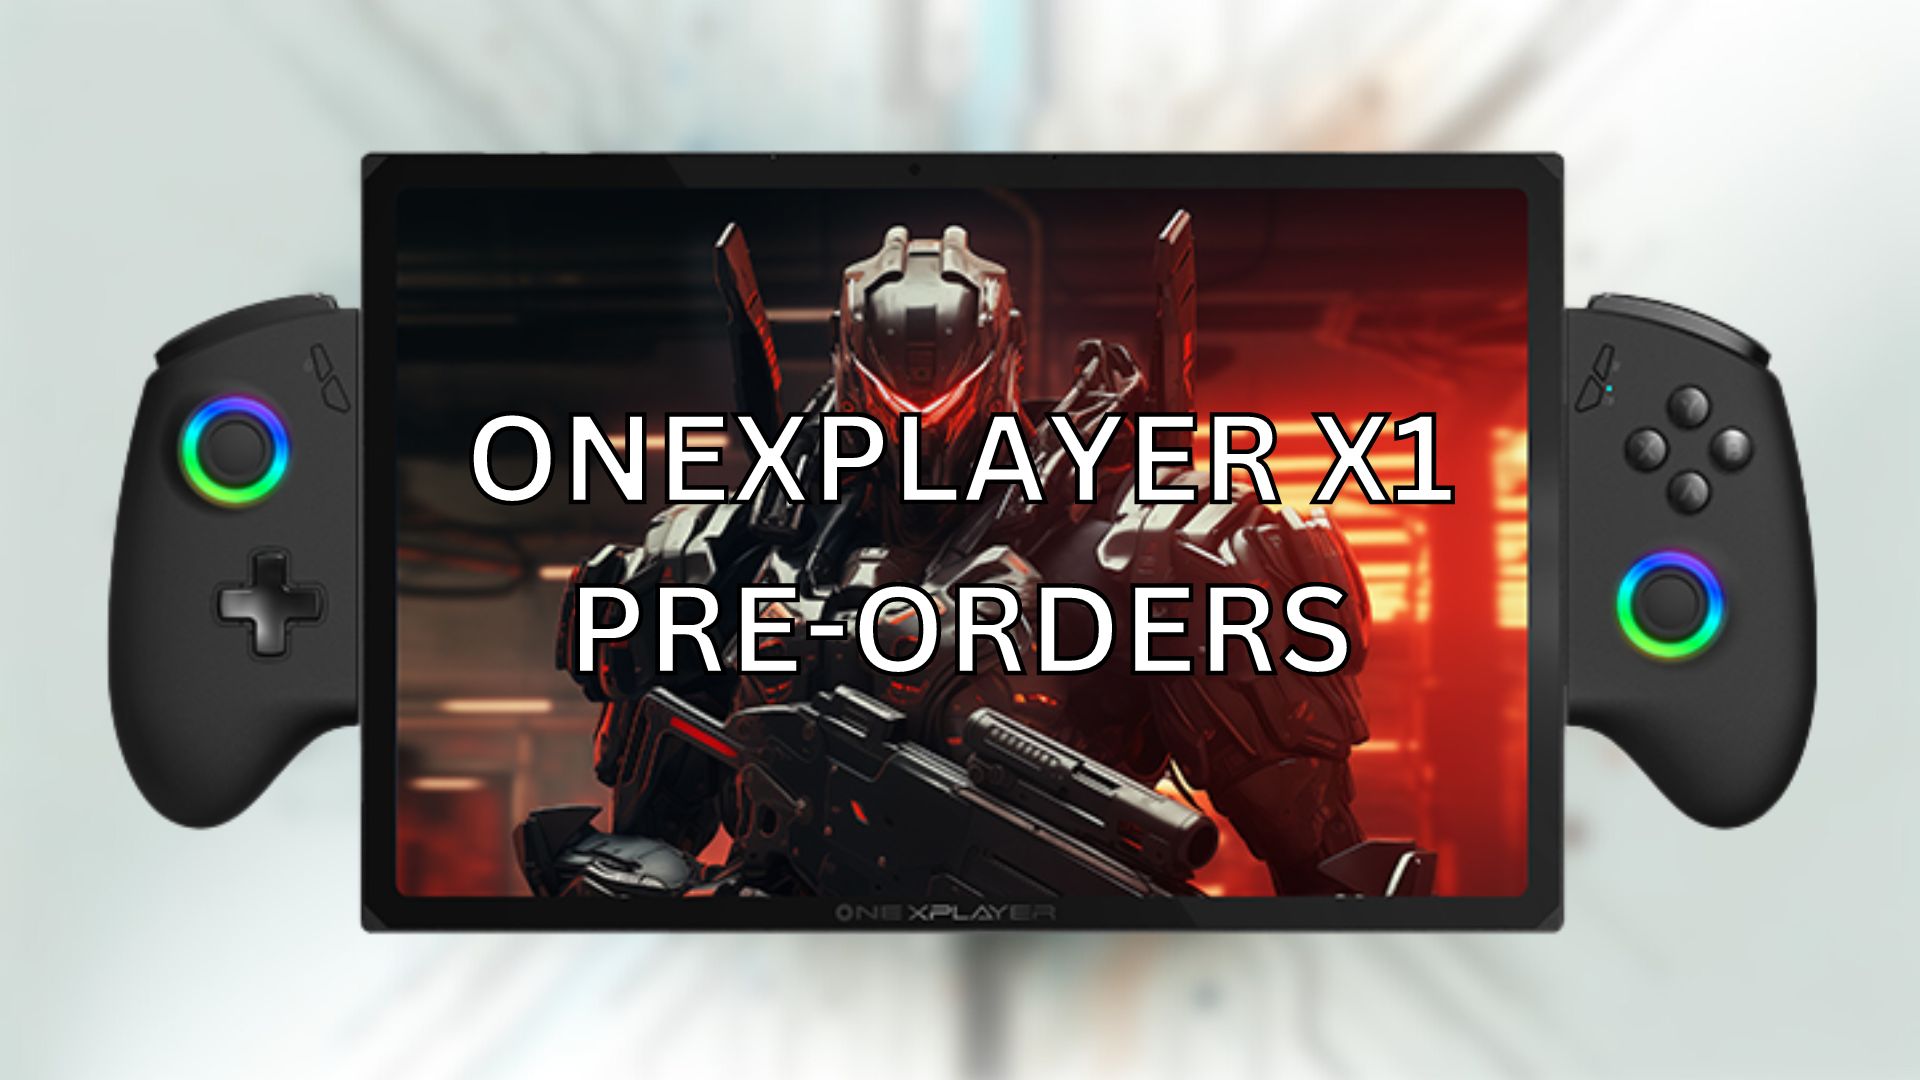 ONEXPLAYER X1 pre-orders – 3-in-1 tablet, laptop and handheld gaming PC